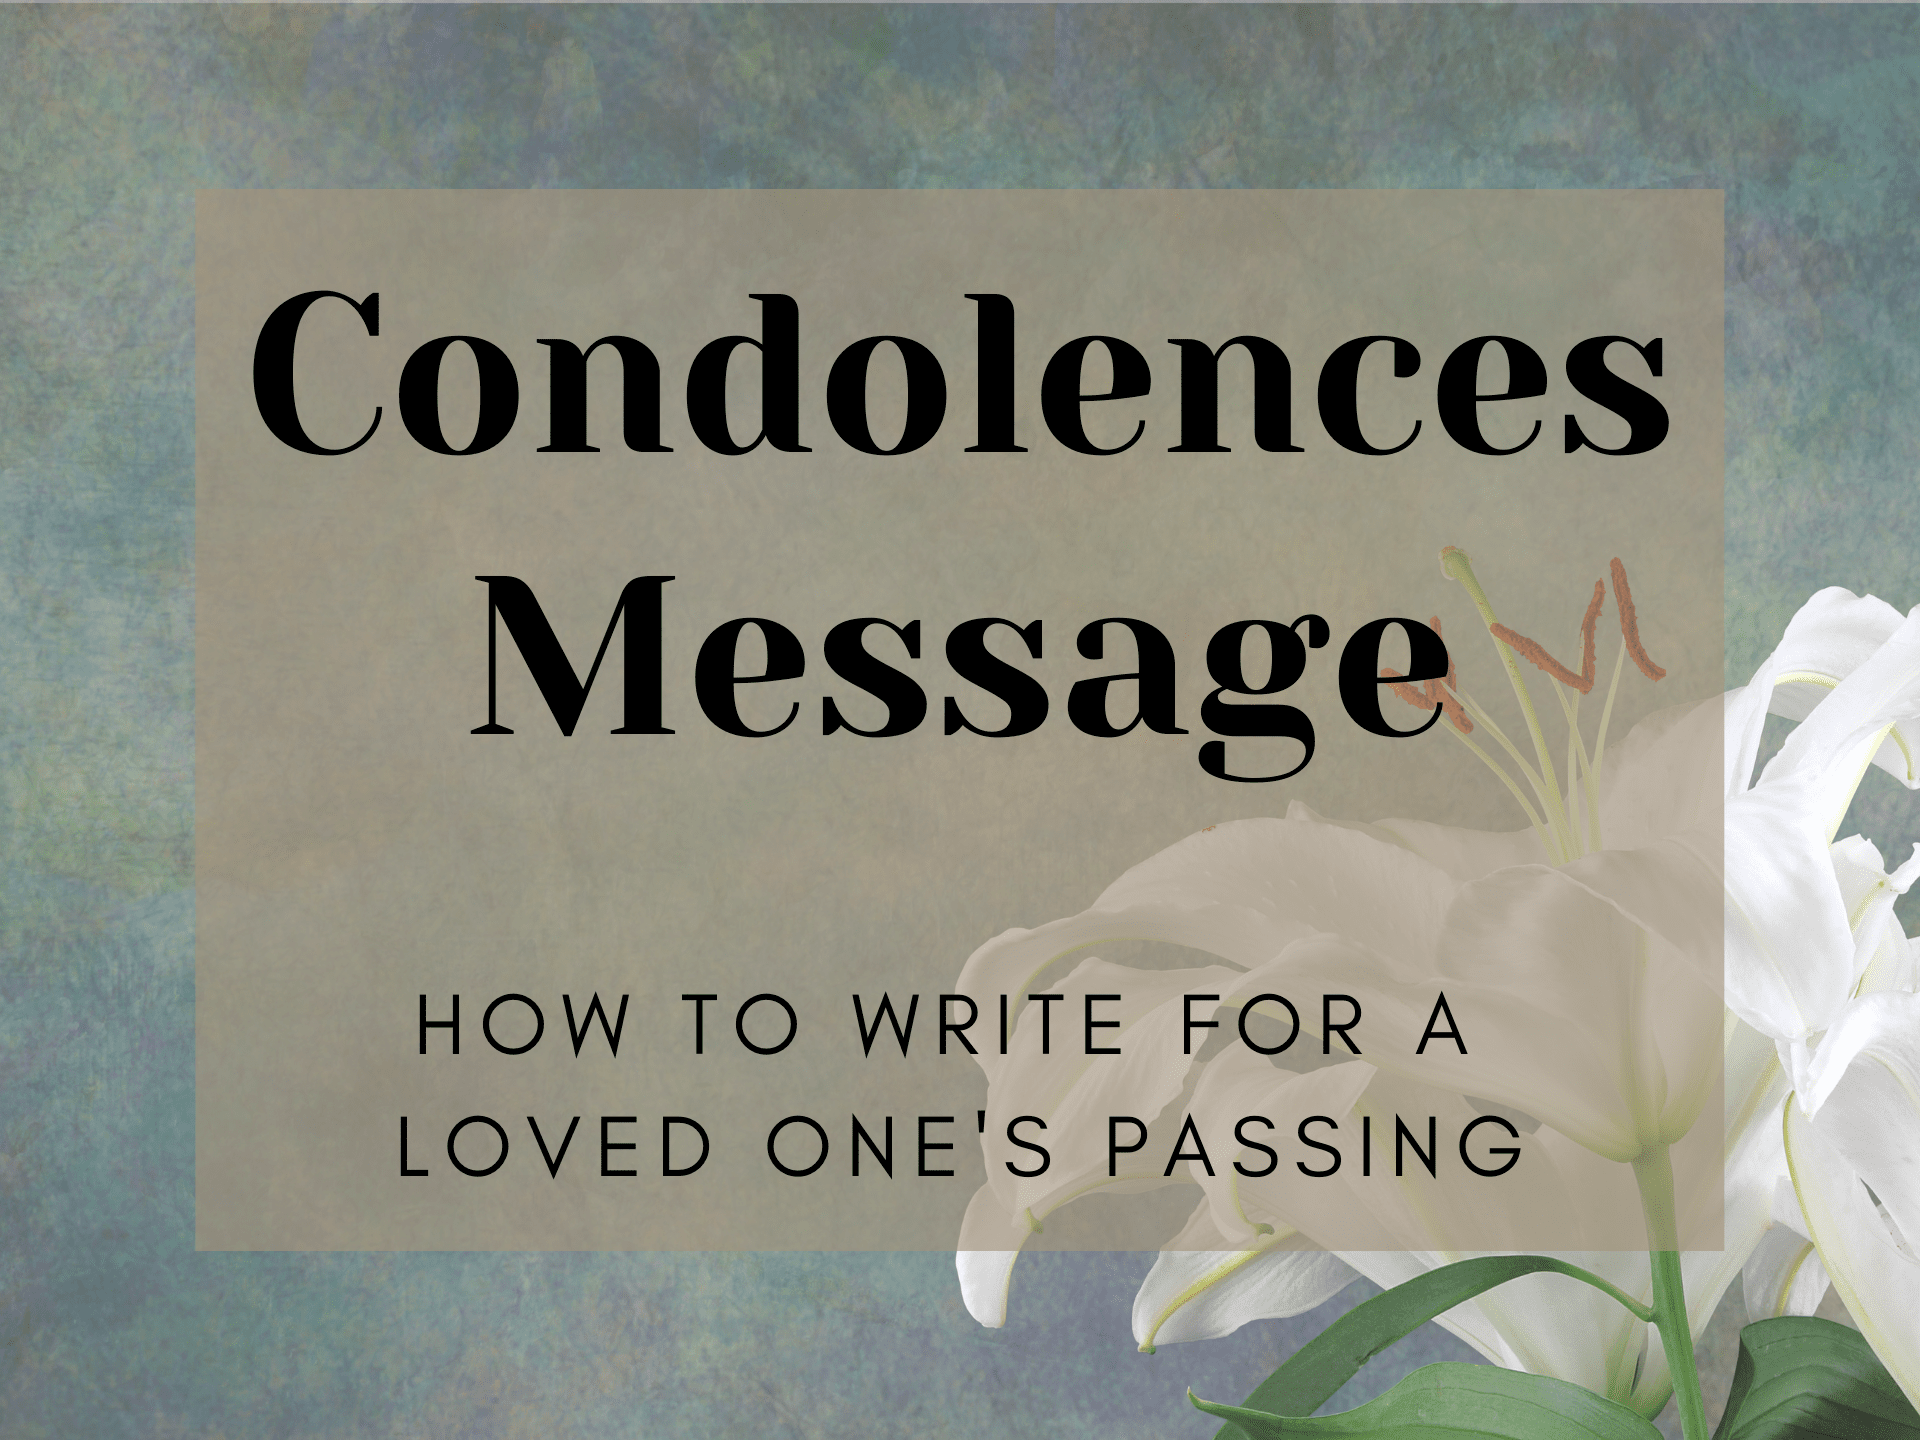 condolence message for loss of father